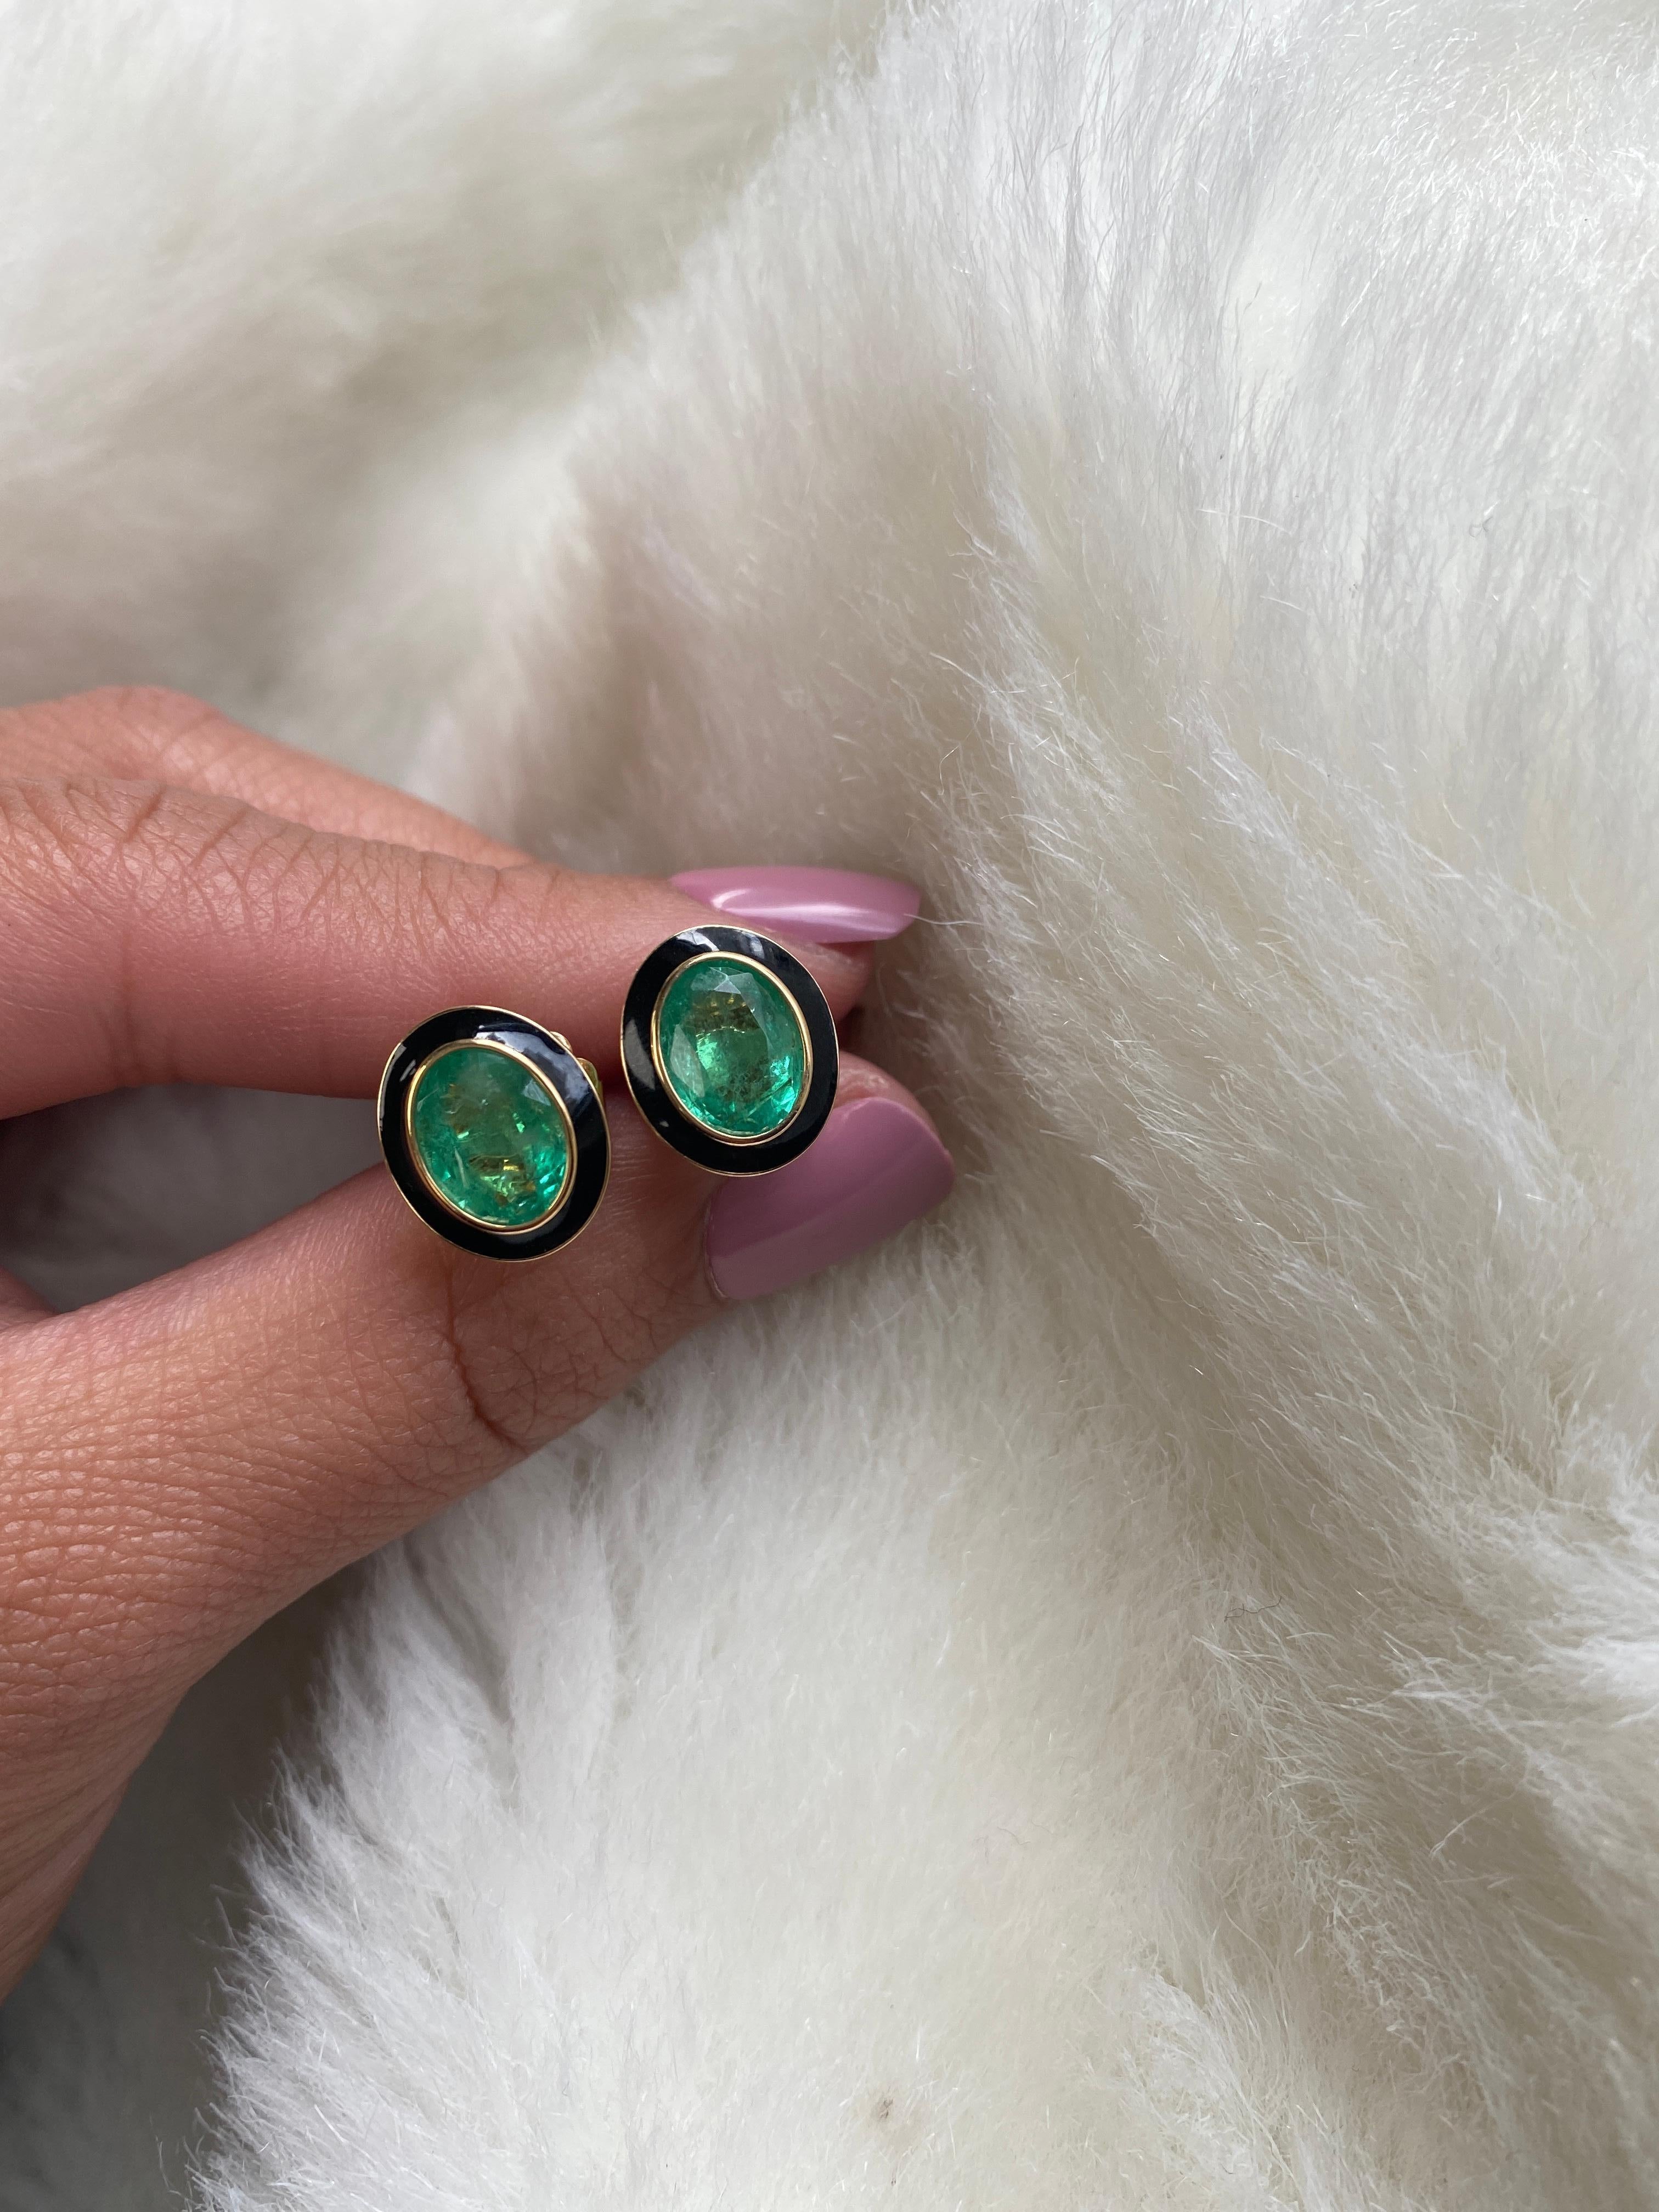 Emerald Oval Studs with Black Enamel in 18K Yellow Gold, from 'Queen' Collection. The combination of enamel, and Emerald represents power, richness and passion of a true Queen. The feeling of luxury is what we’re aiming for, but at a price point